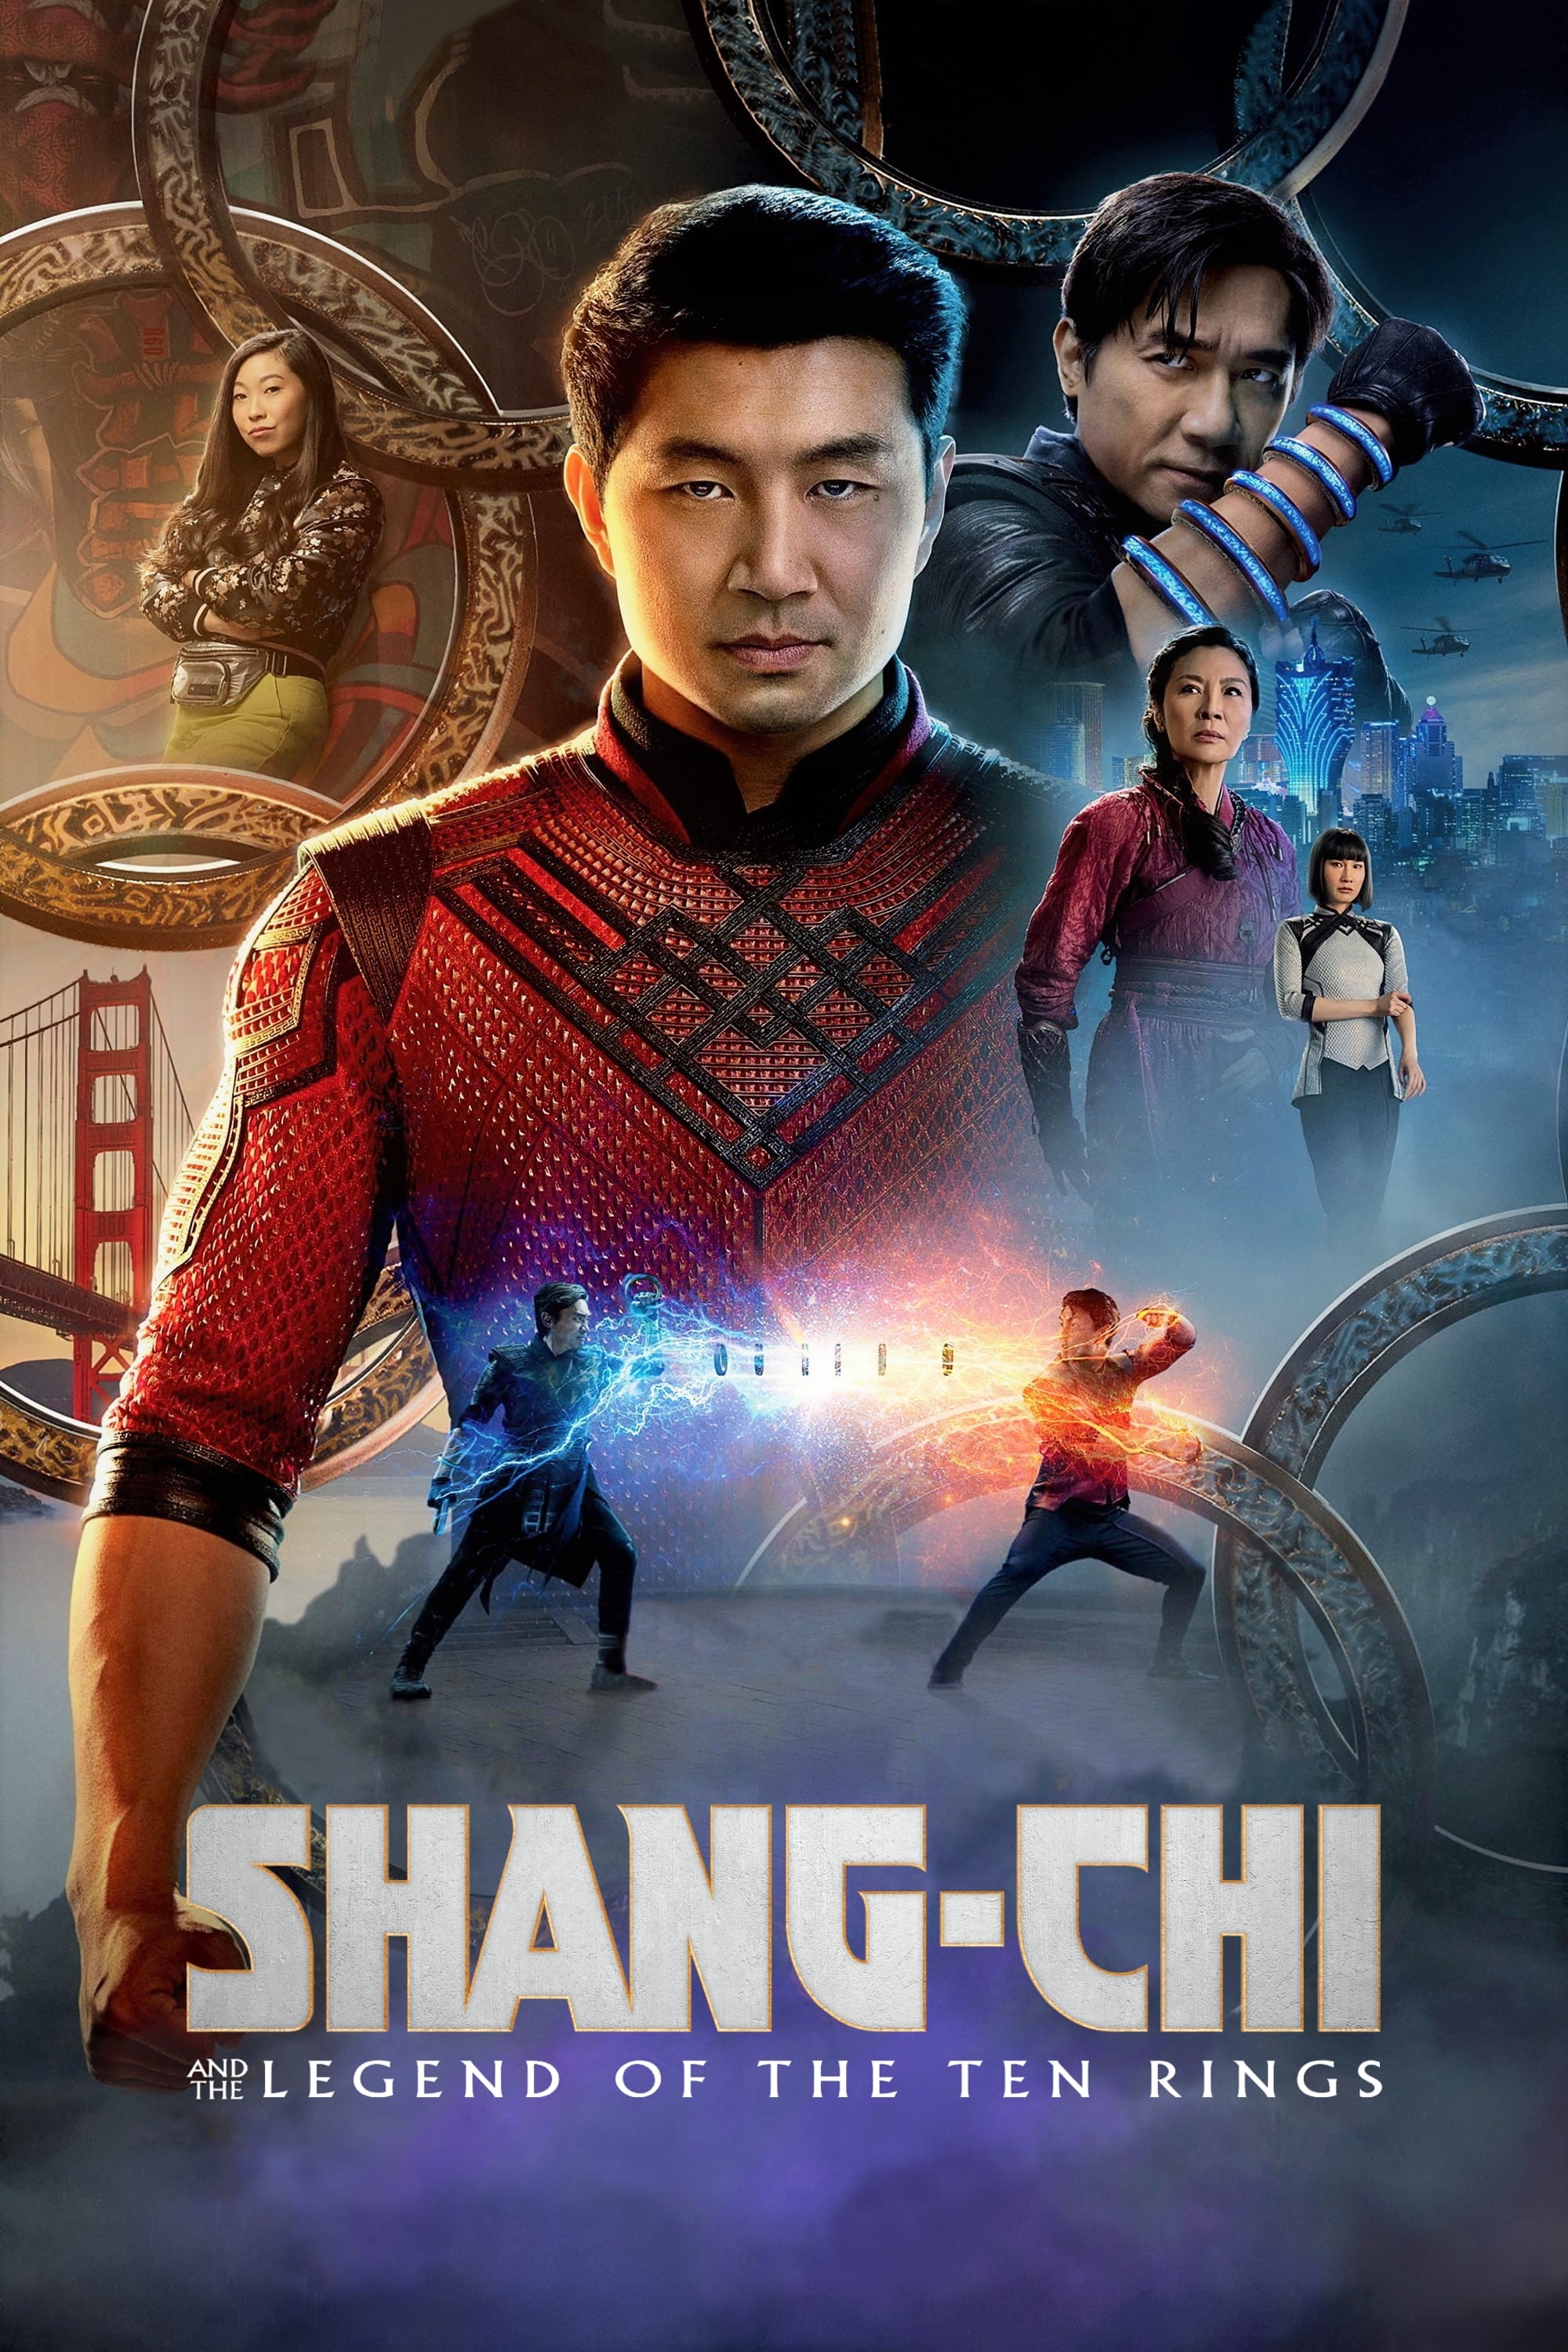 Shang-Chi and the Legend of the Ten Rings Soundtrack